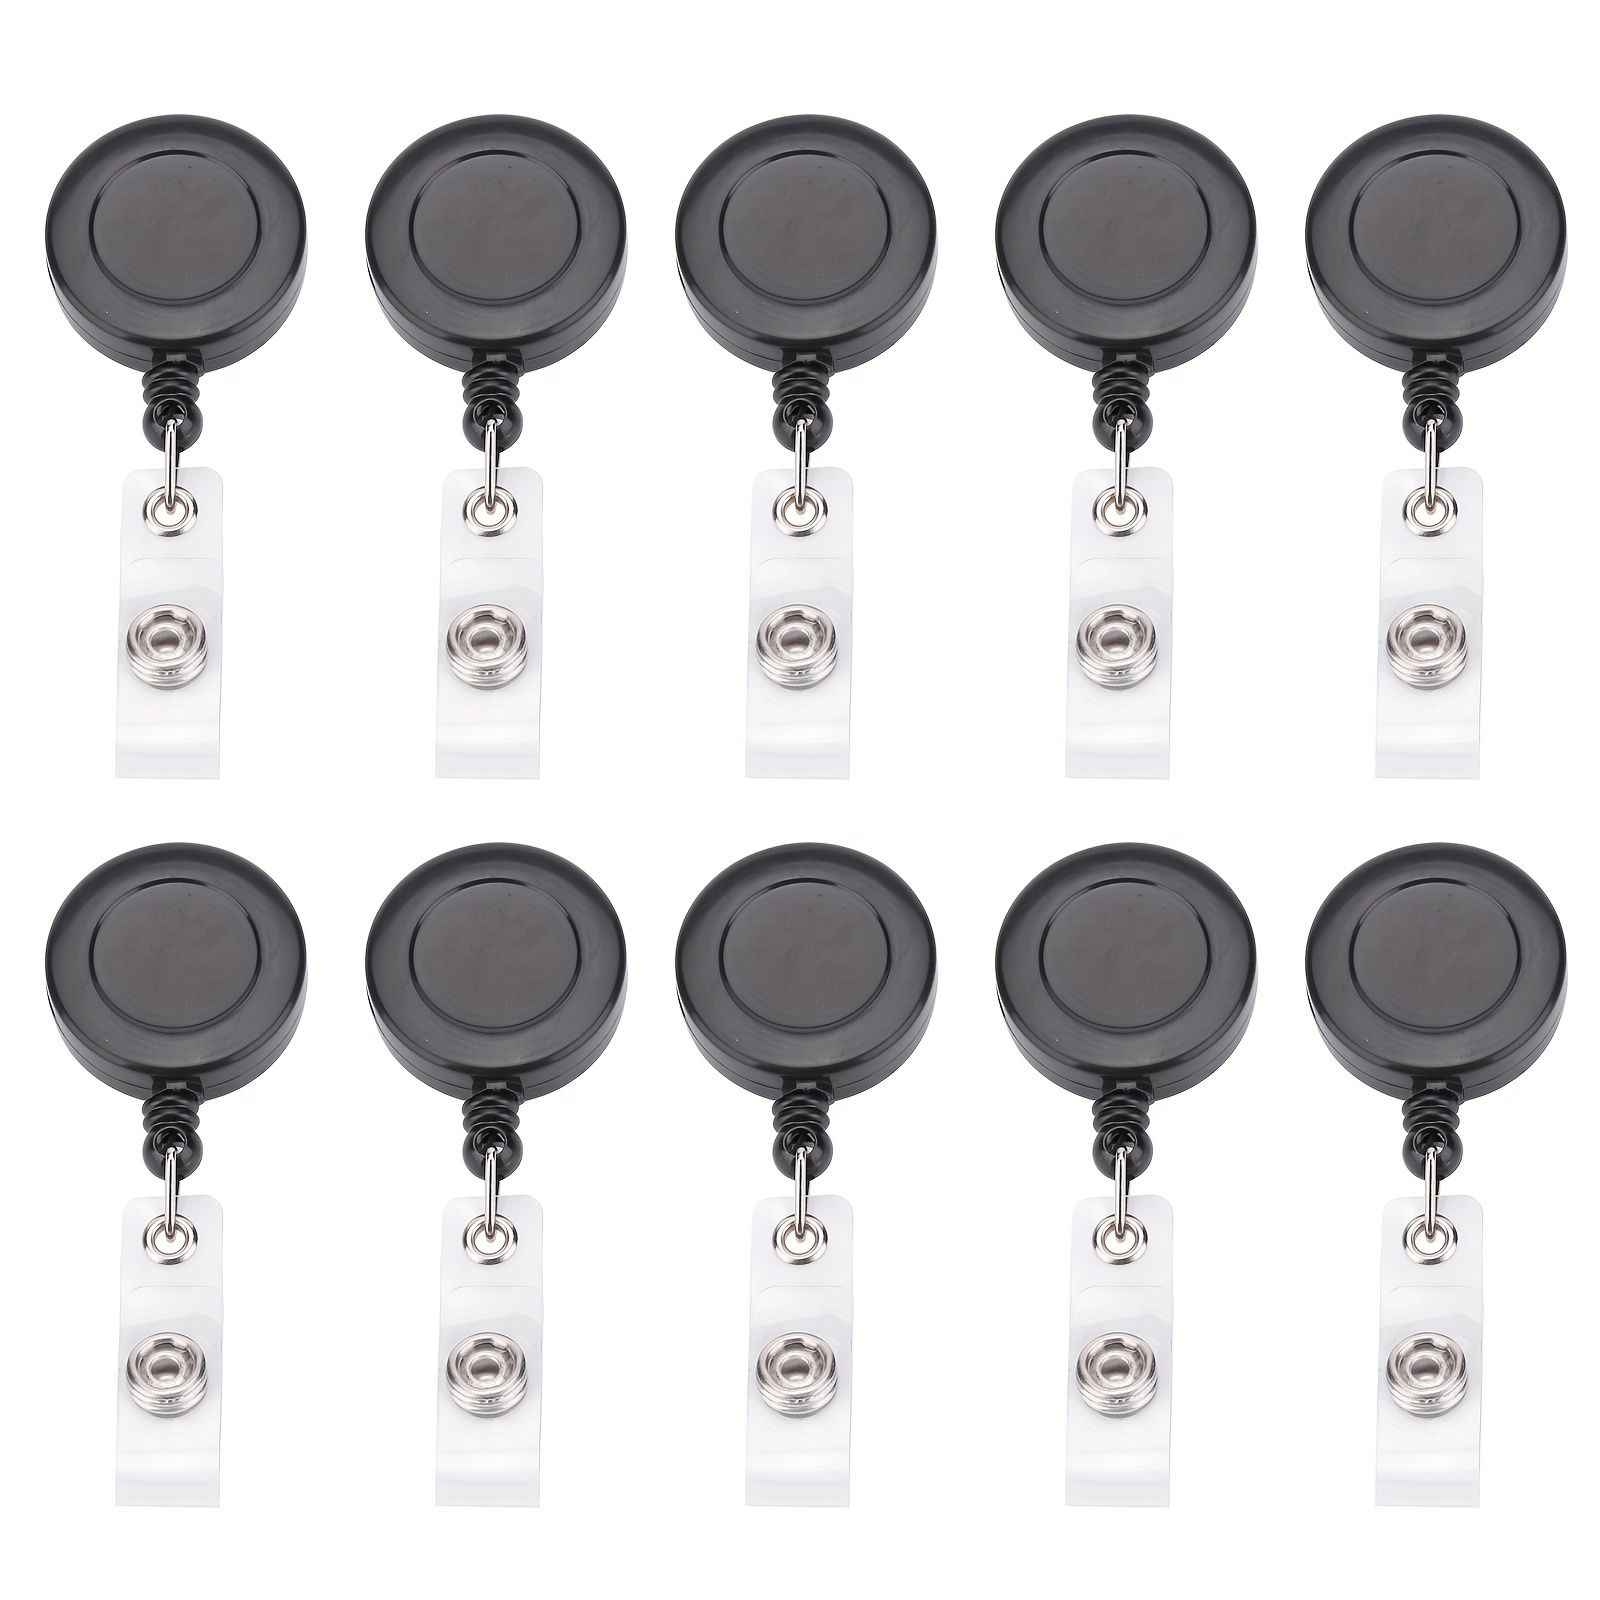 

10pcs Round Easy Pull Buckle Stretchable Certificate Buckle